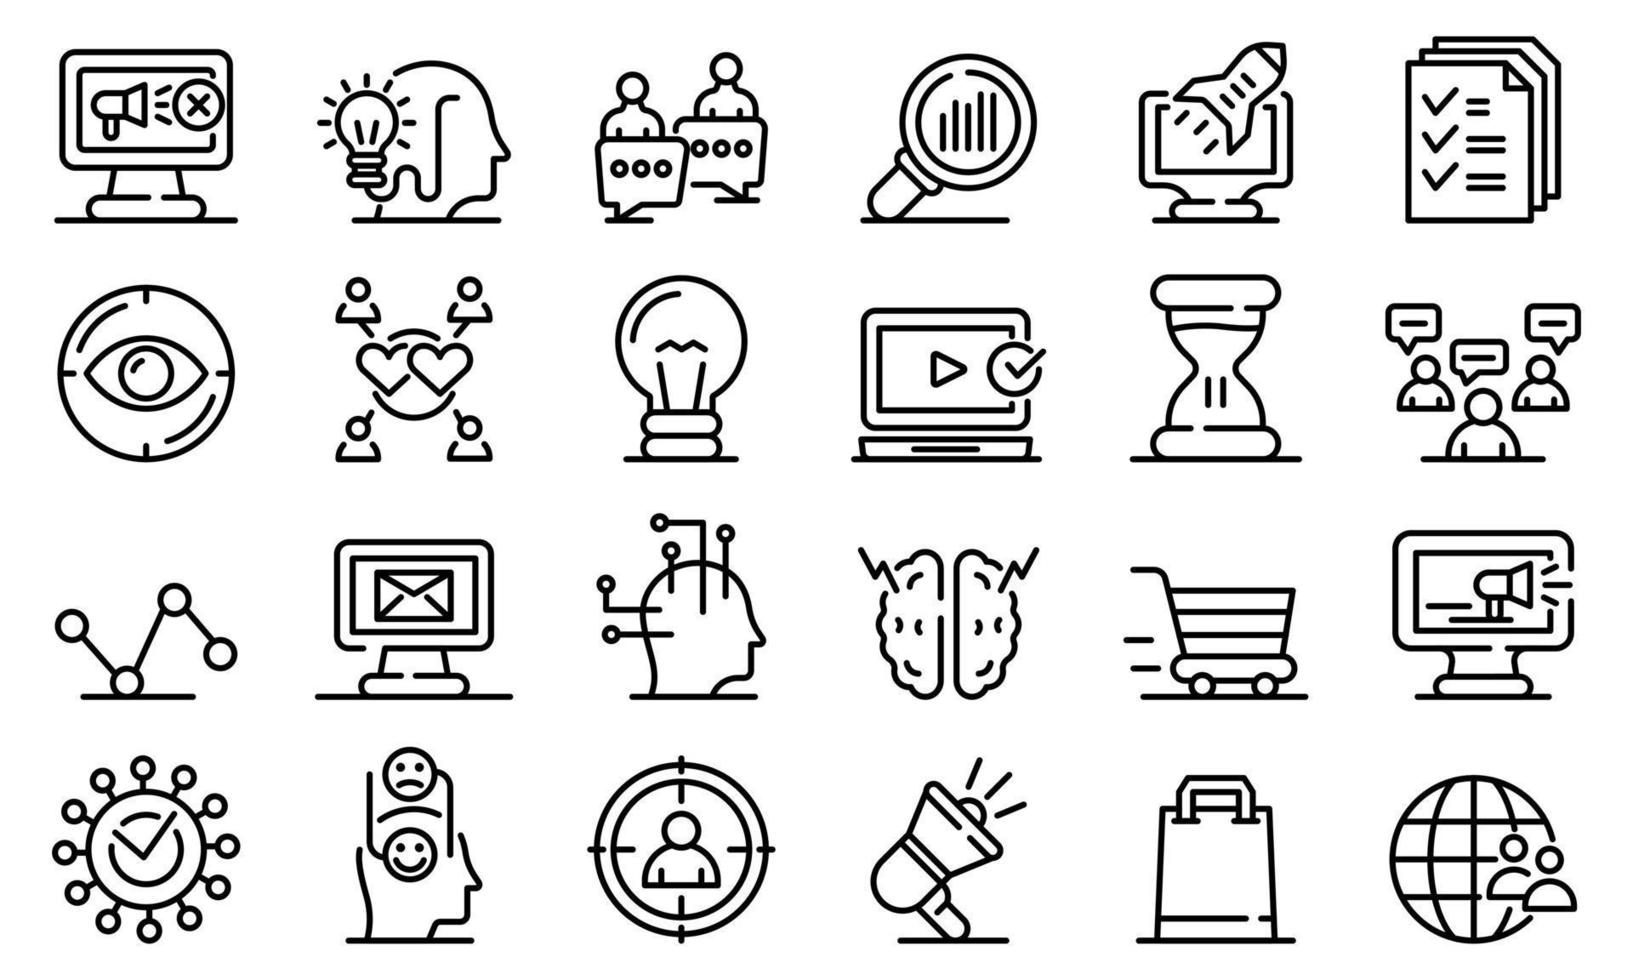 Neuromarketing icons set, outline style vector